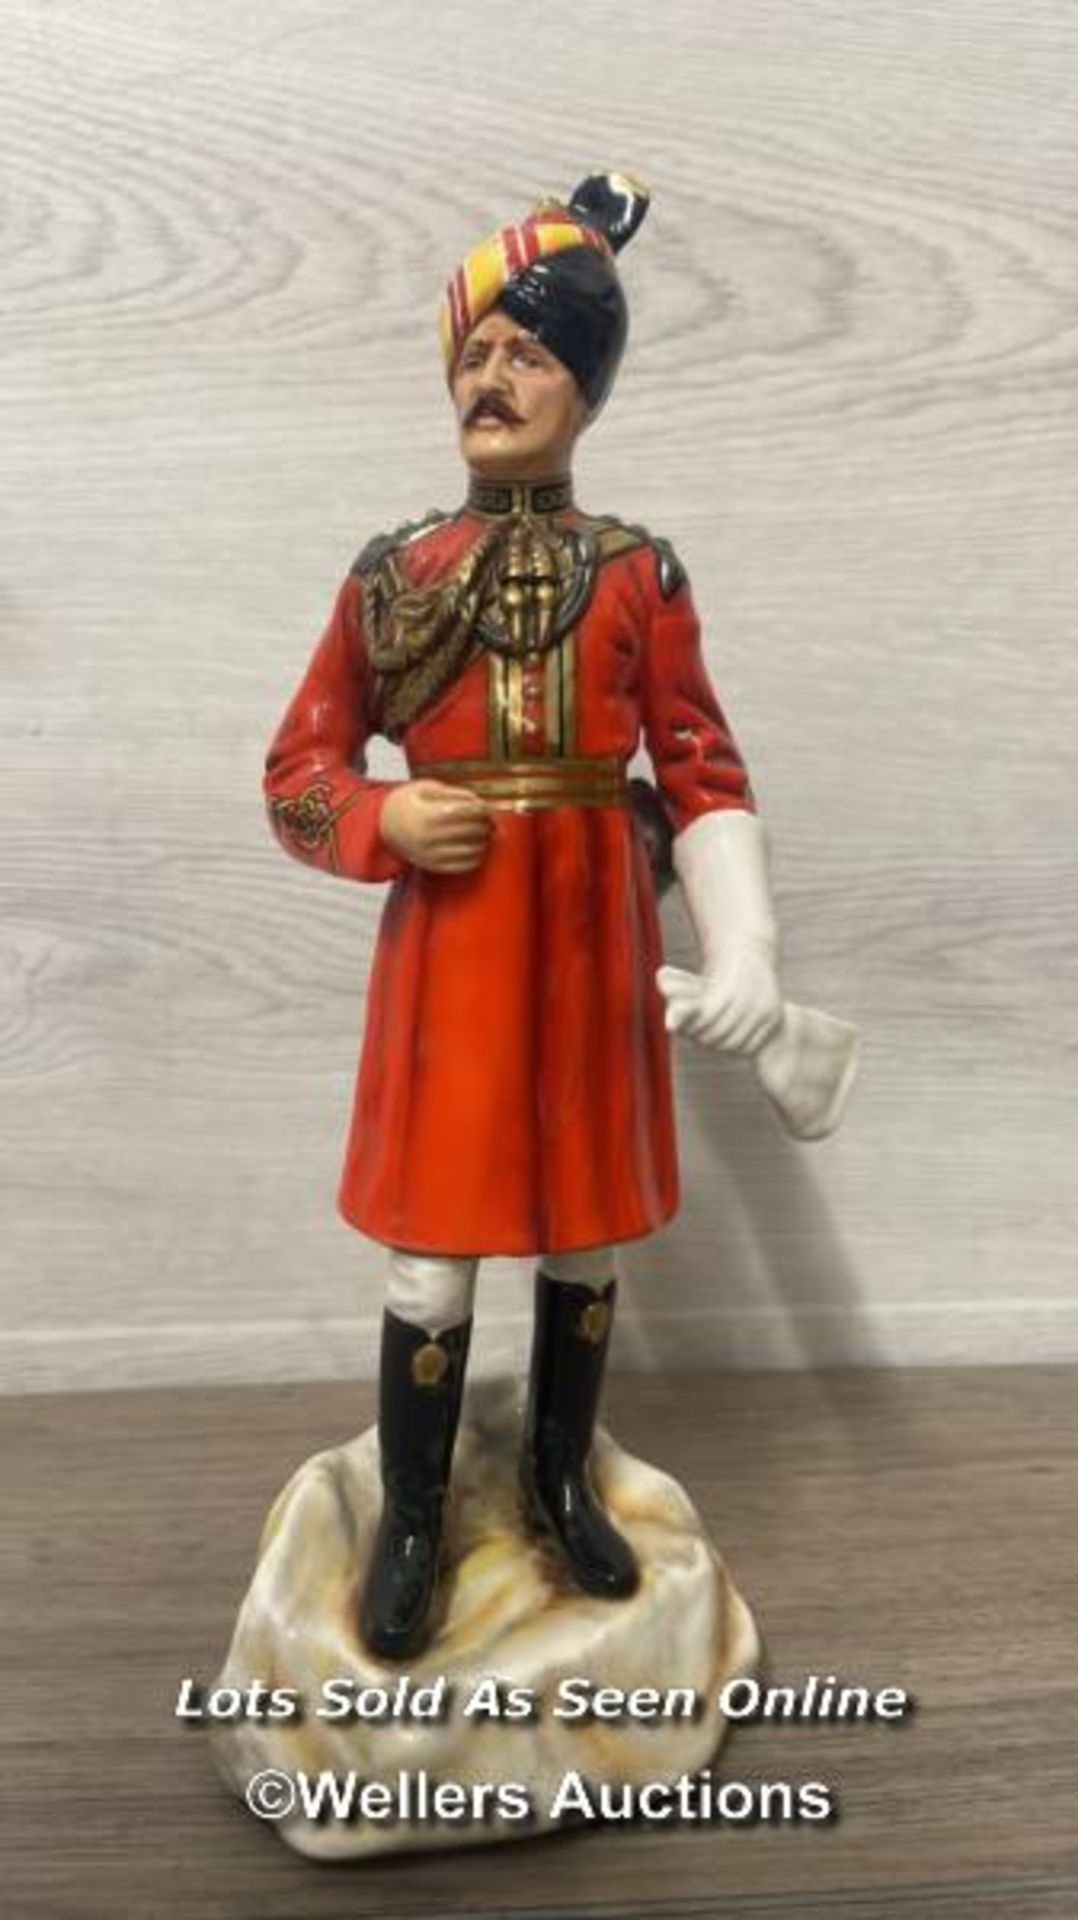 MICHAEL J SUTTY HAND PAINTED PORCELAIN FIGURE, GOVERNORS BODYGUARDS, MADRAS, MODEL NO.106 LIMITED